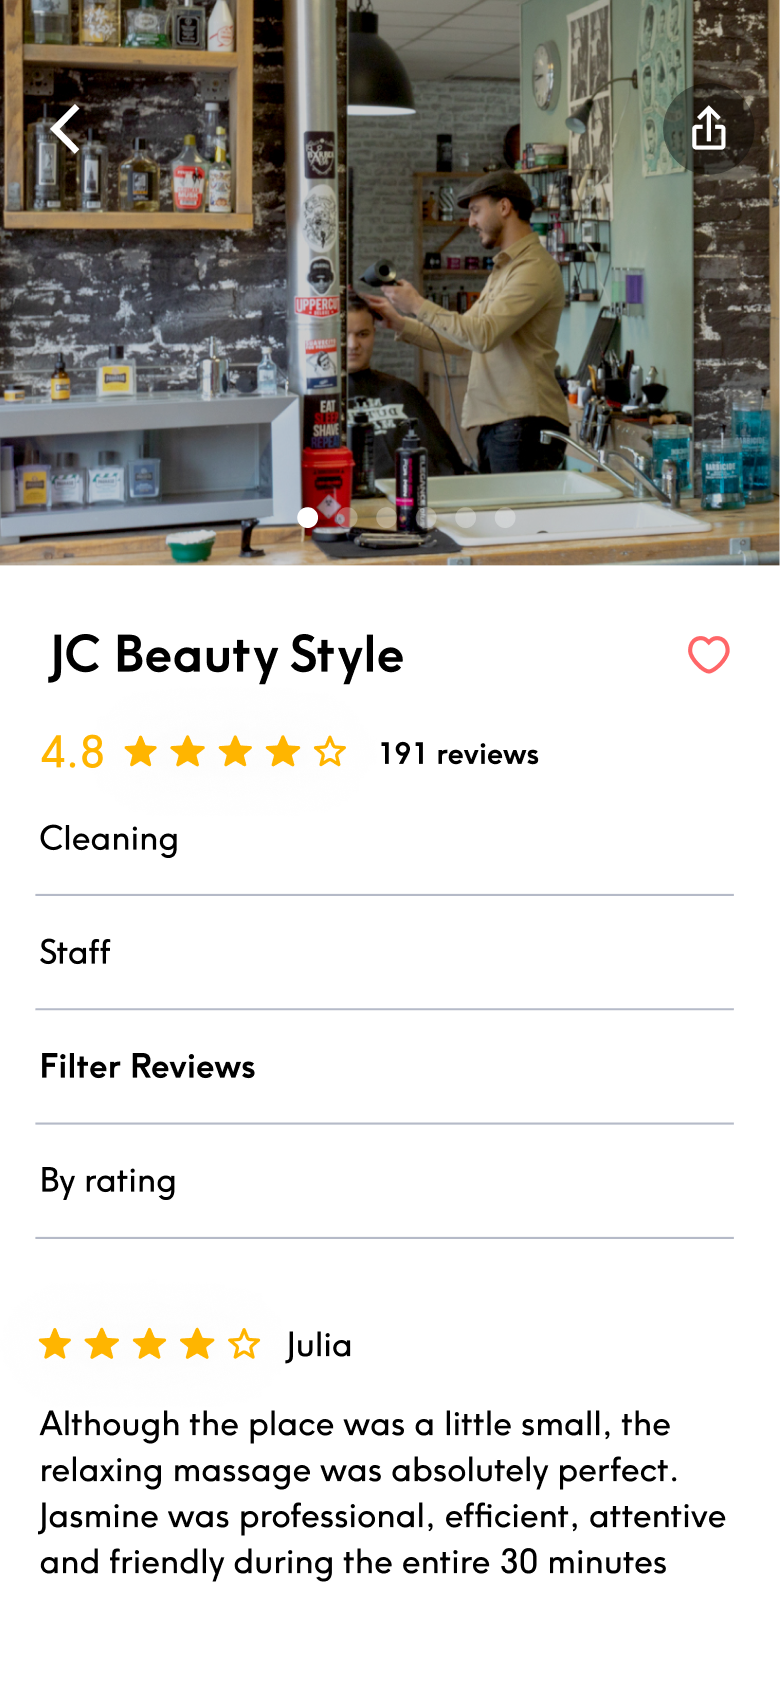 Are you looking to increase your salon or spa’s visibility online? With Treatwell, you’ll have a dedicated salon page on the Treatwell app and website, with verified reviews and an excellent Google integration.